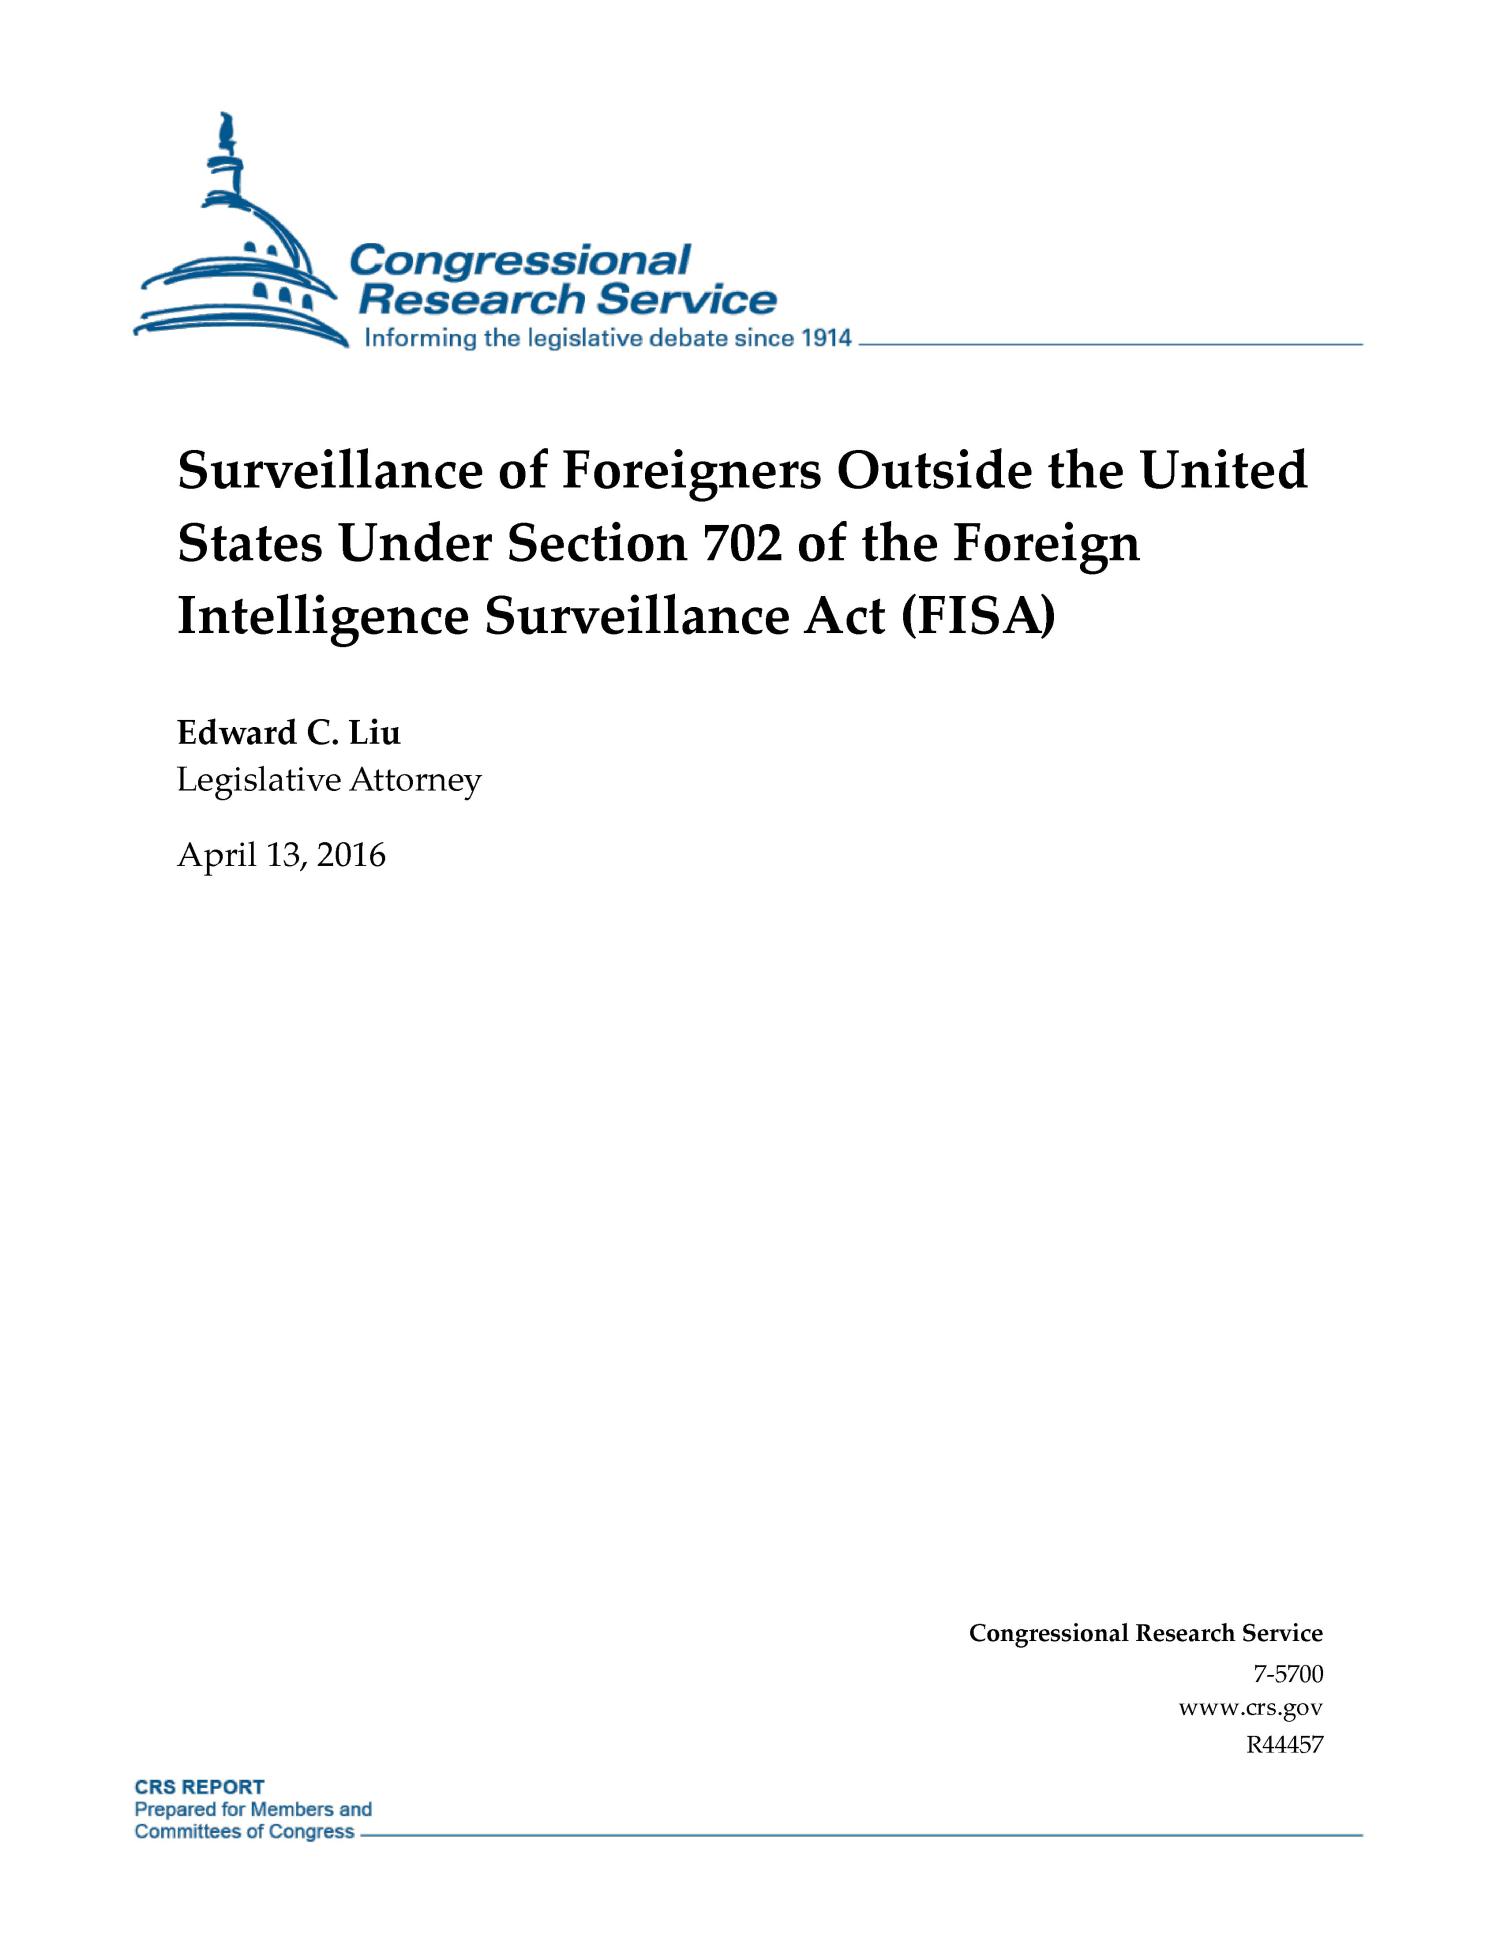 Surveillance of Foreigners Outside the United States Under Section 702